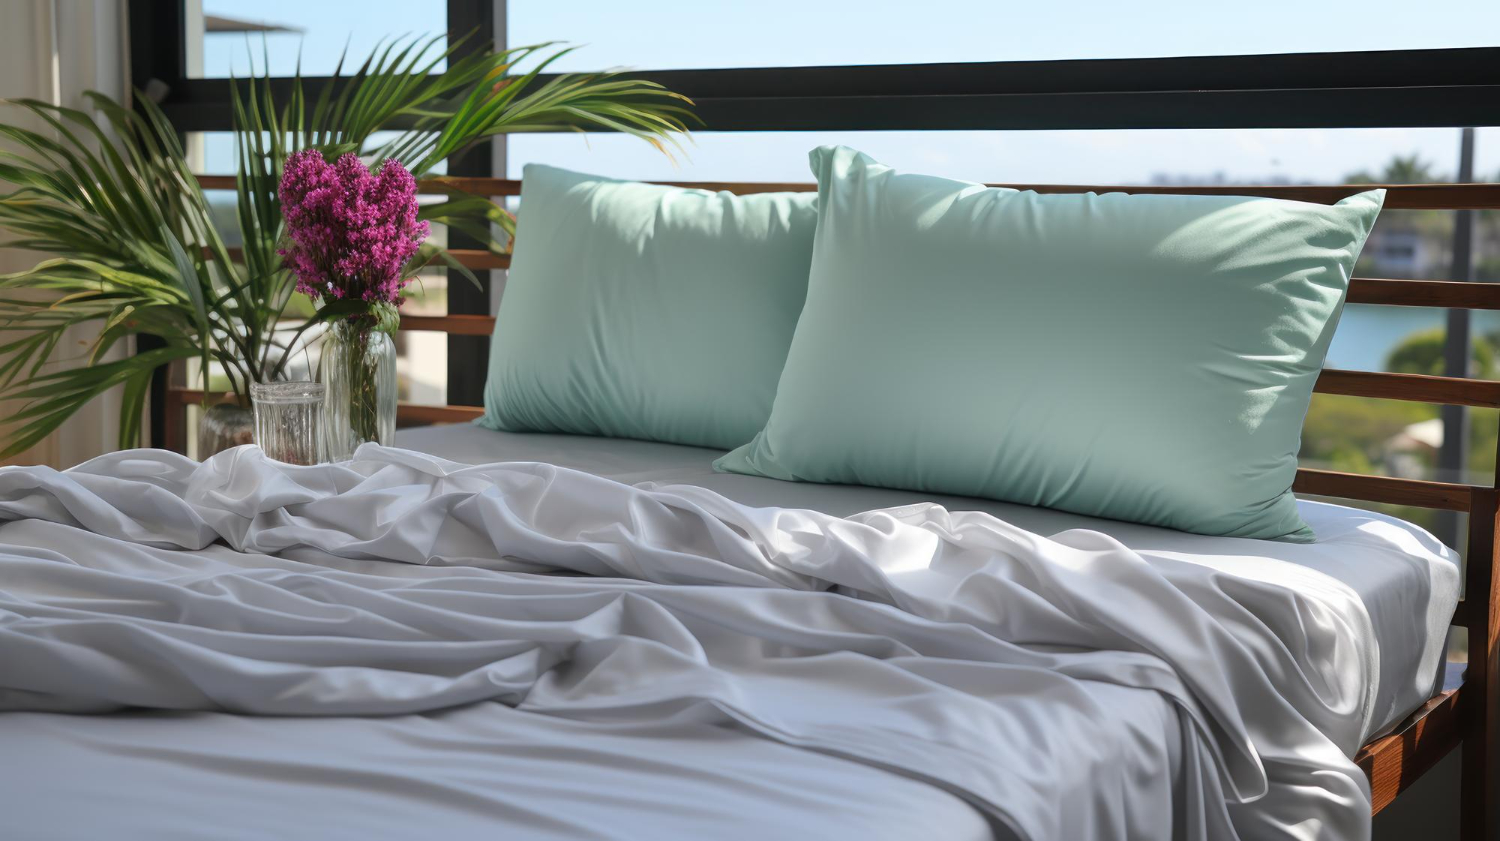 King Size Bed Sheets and Comforter Sets